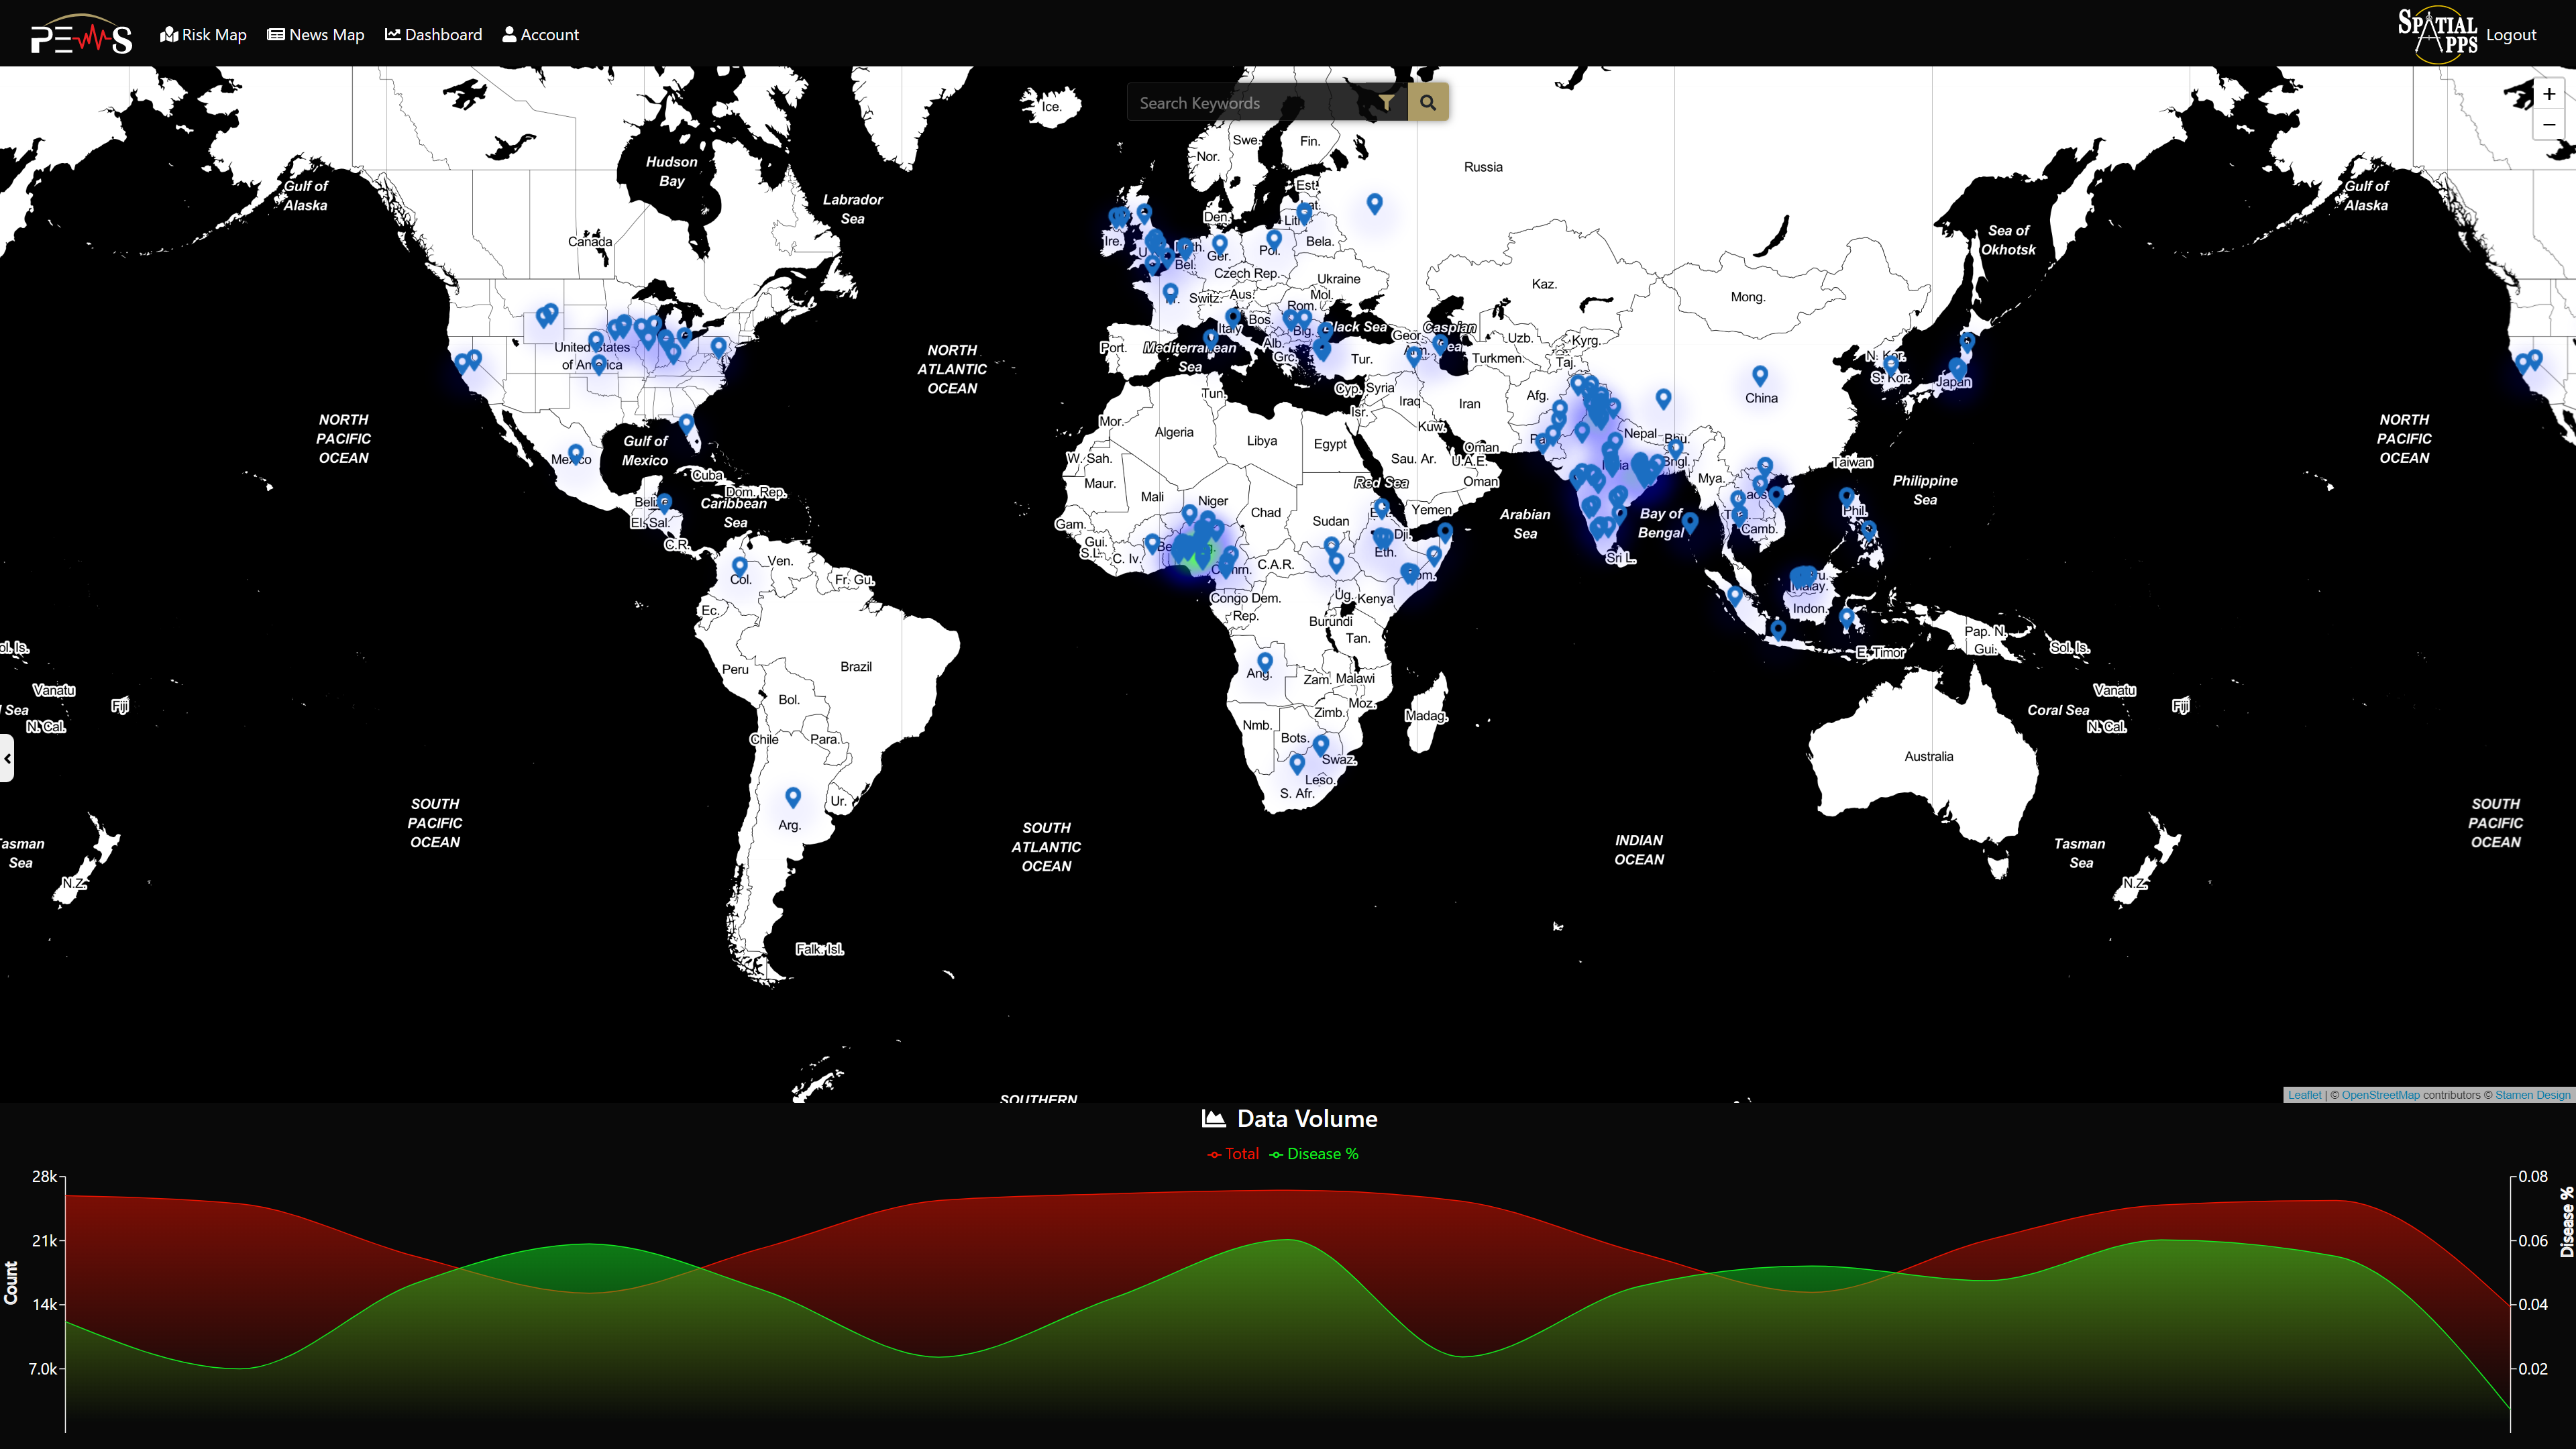 Mercury-Health Pandemic Early Warning System (PEWS) Risk Map screenshot, Spatial Apps Pty Ltd